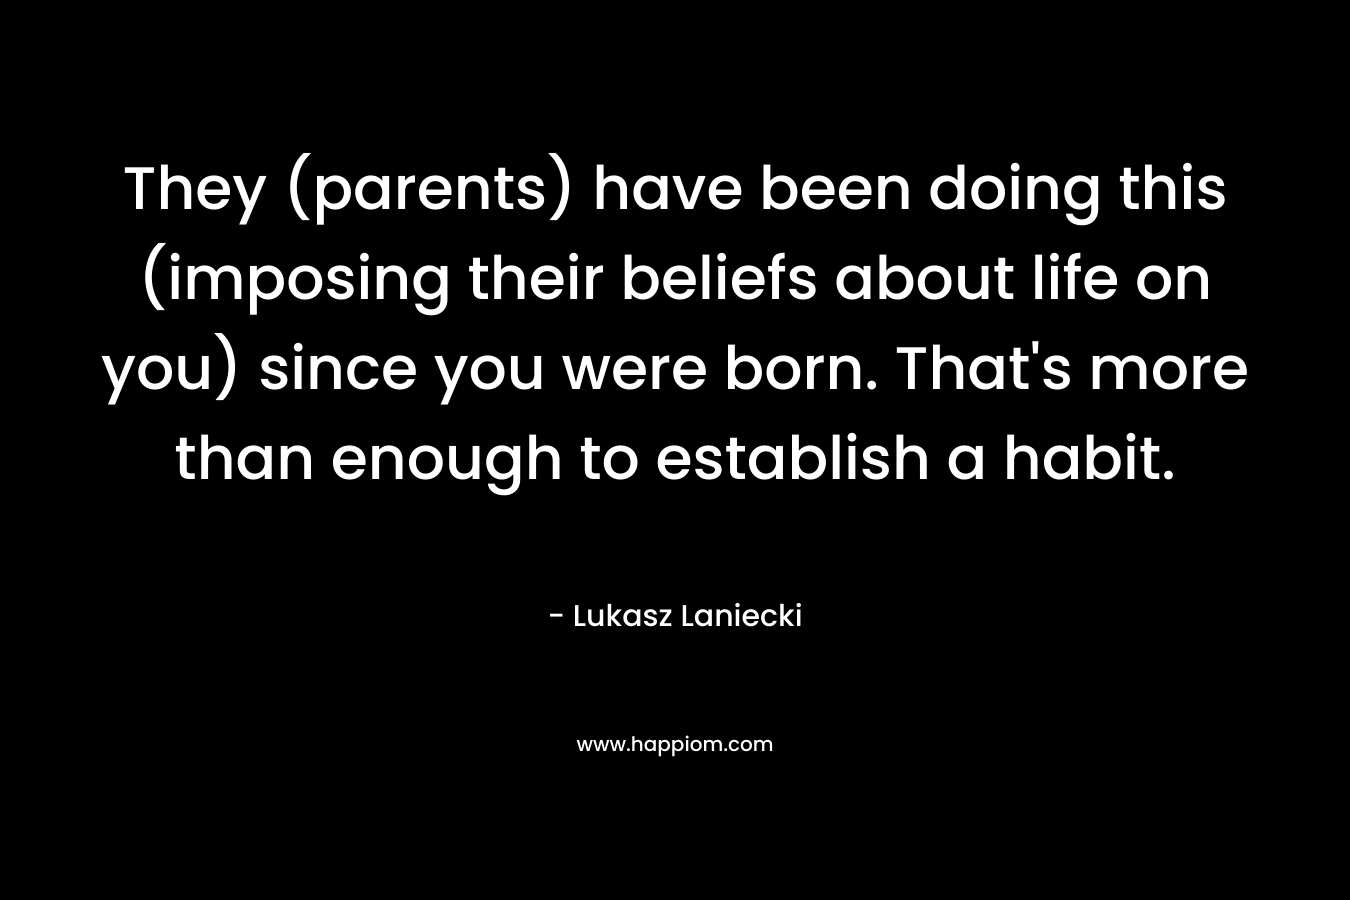 They (parents) have been doing this (imposing their beliefs about life on you) since you were born. That’s more than enough to establish a habit. – Lukasz Laniecki